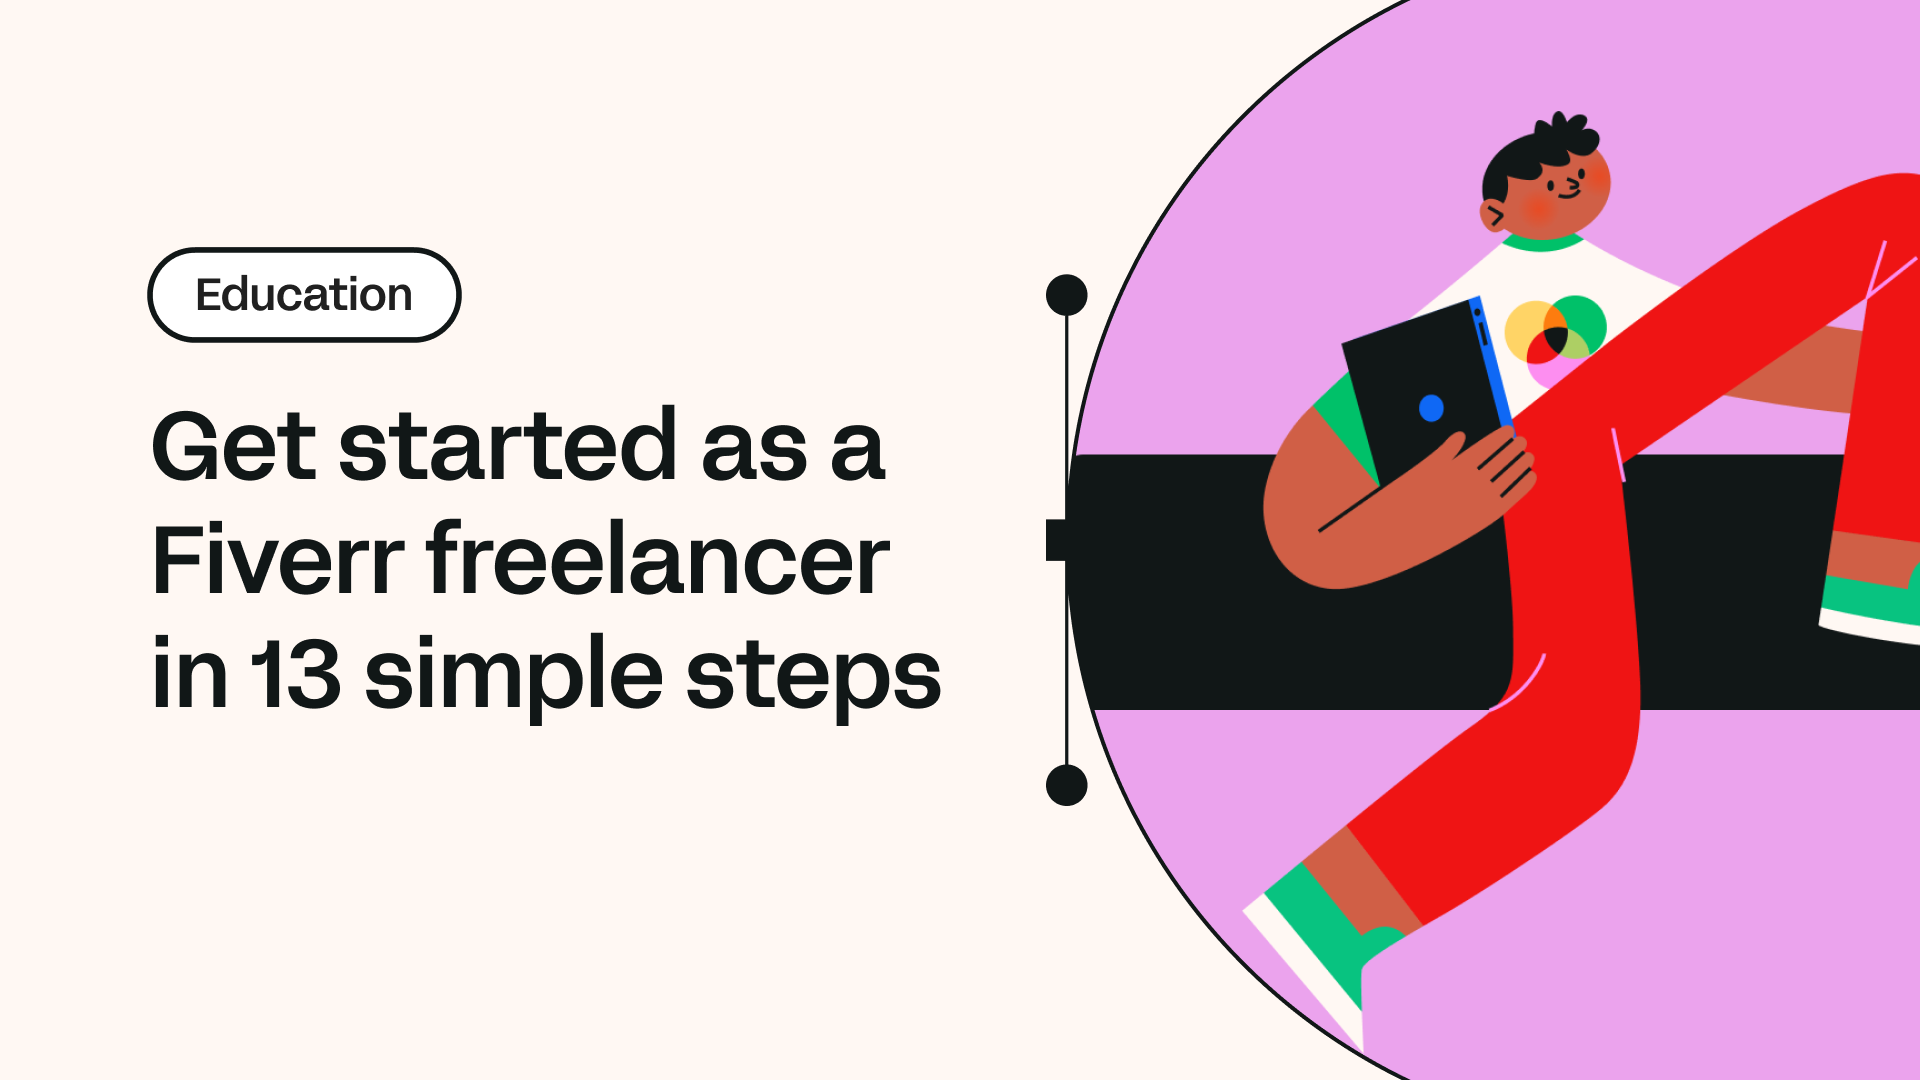 How to get started as a Fiverr freelancer in 13 simple steps | Linearity